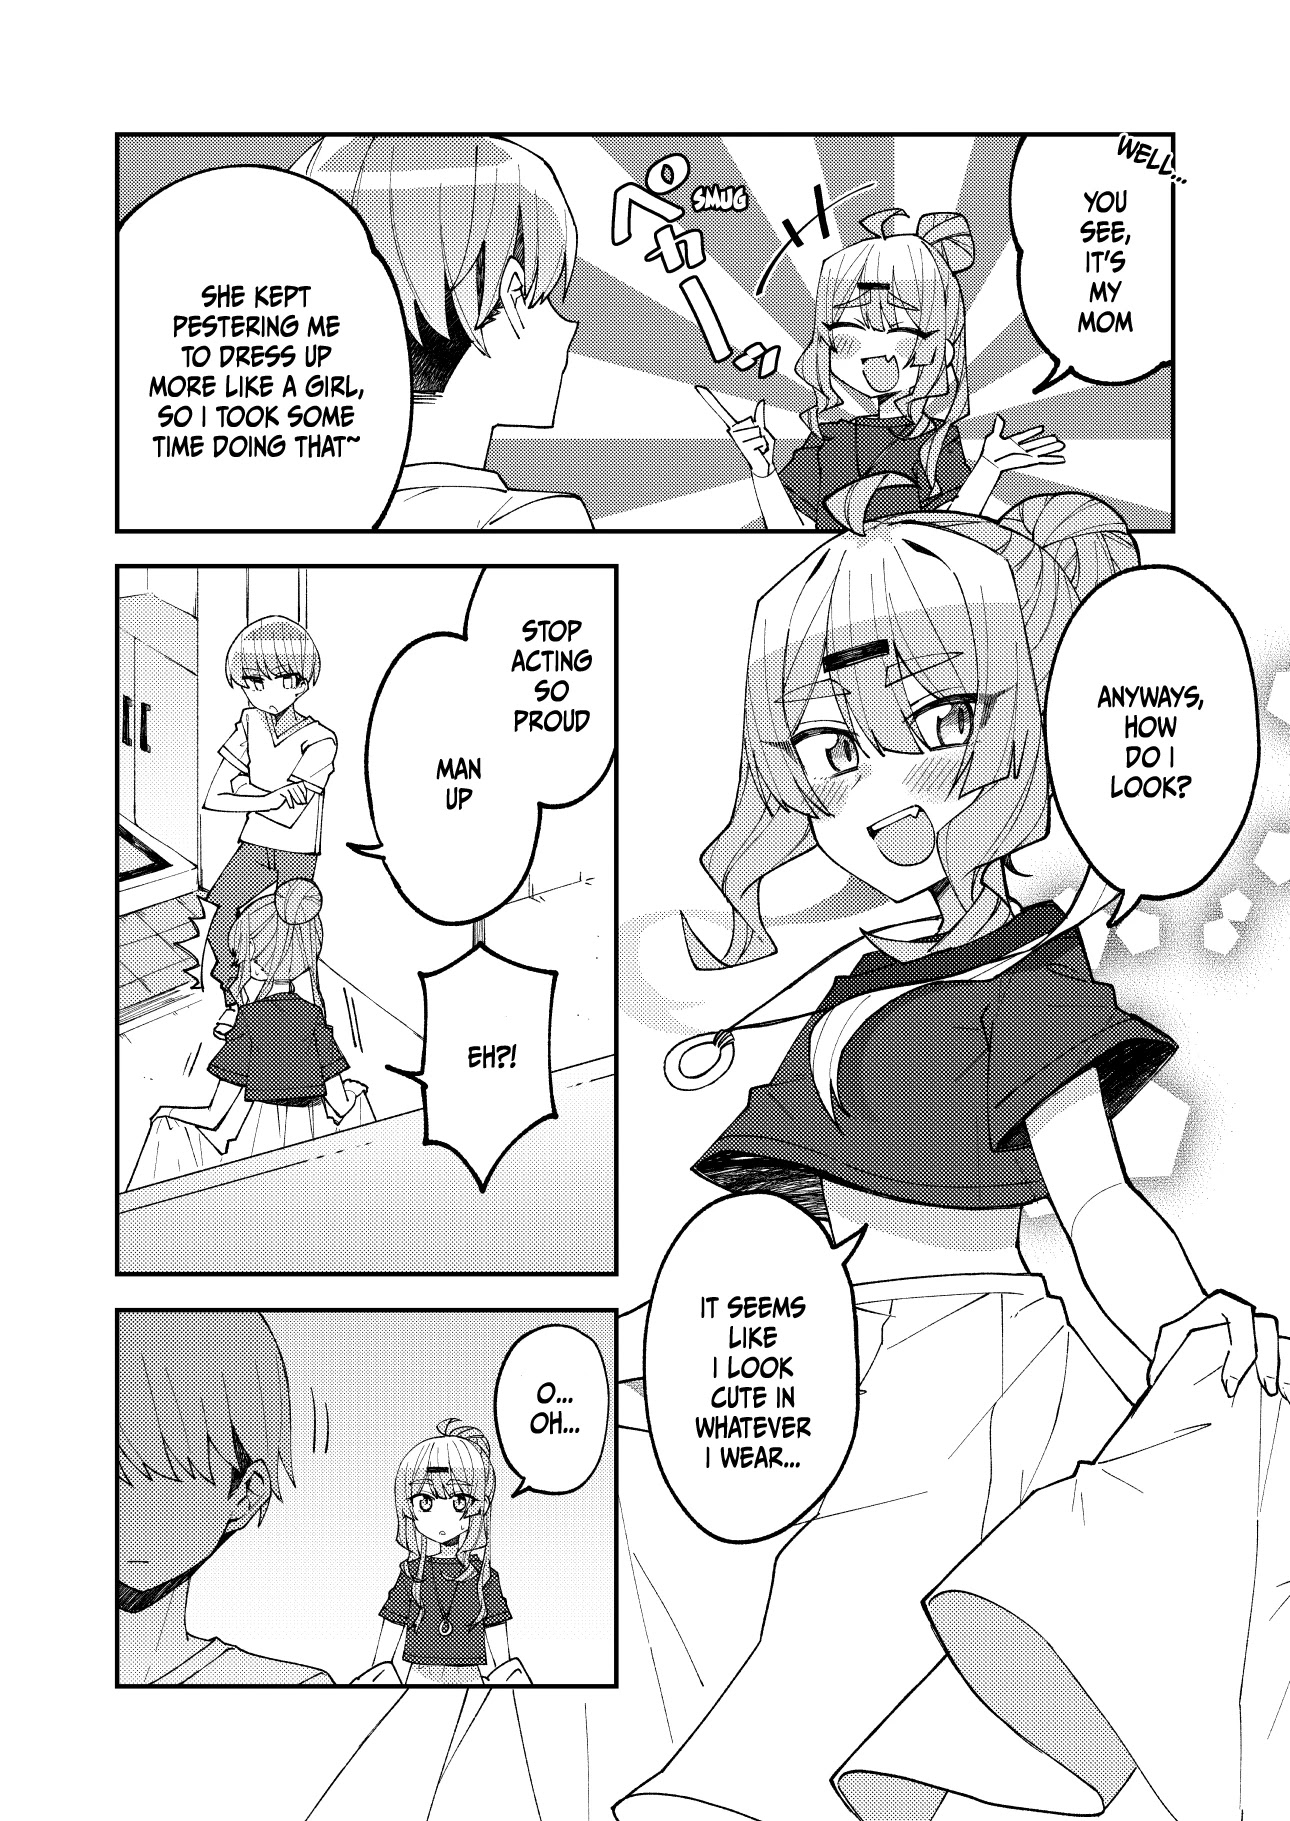 When I Woke Up, I Was A Girl - Page 2